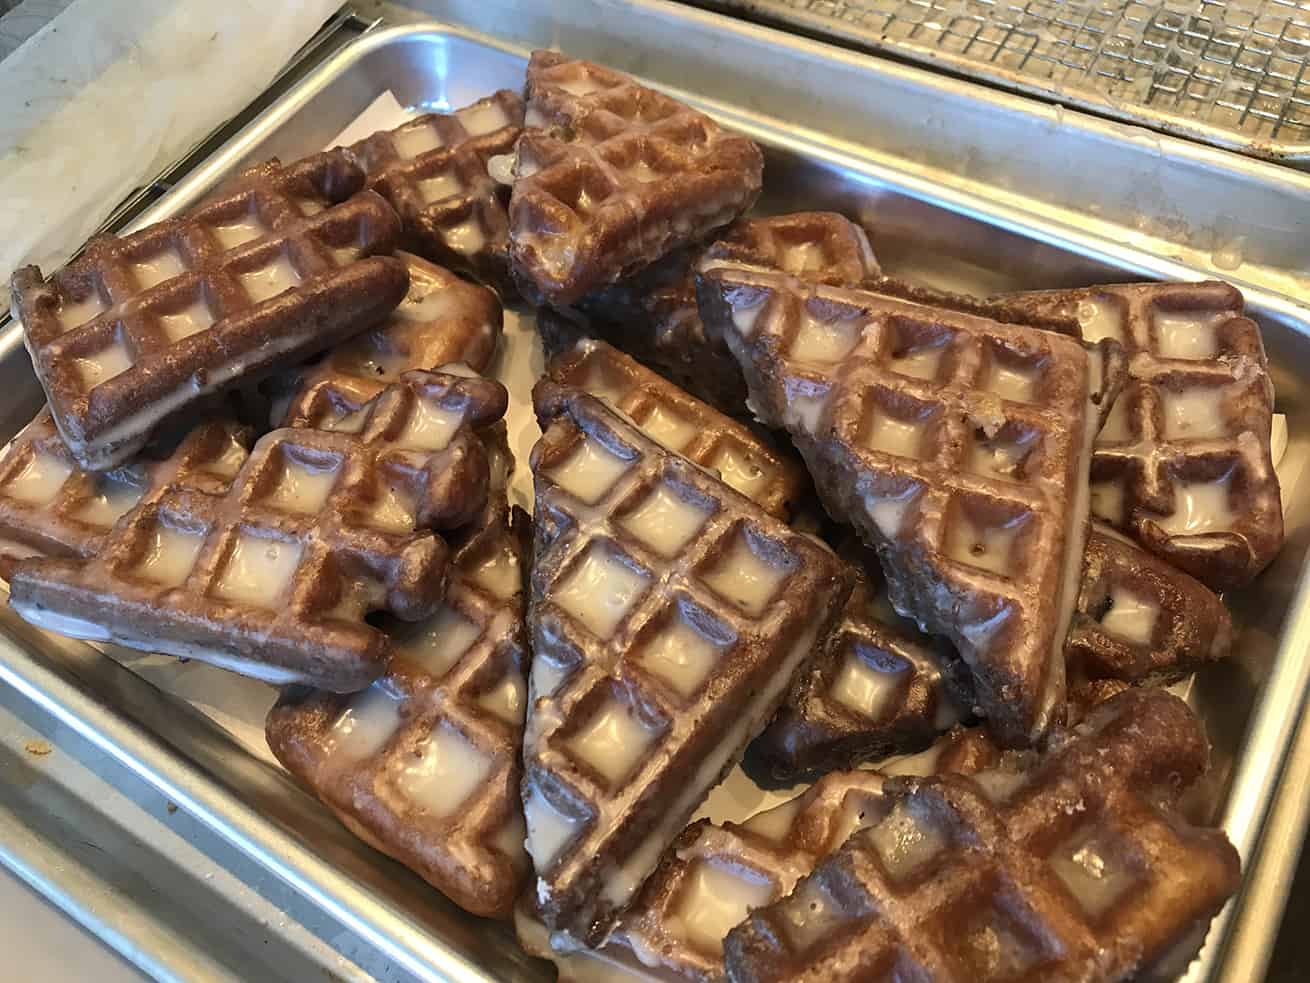 apple fritter waffle donuts hot and ready to eat on a tray